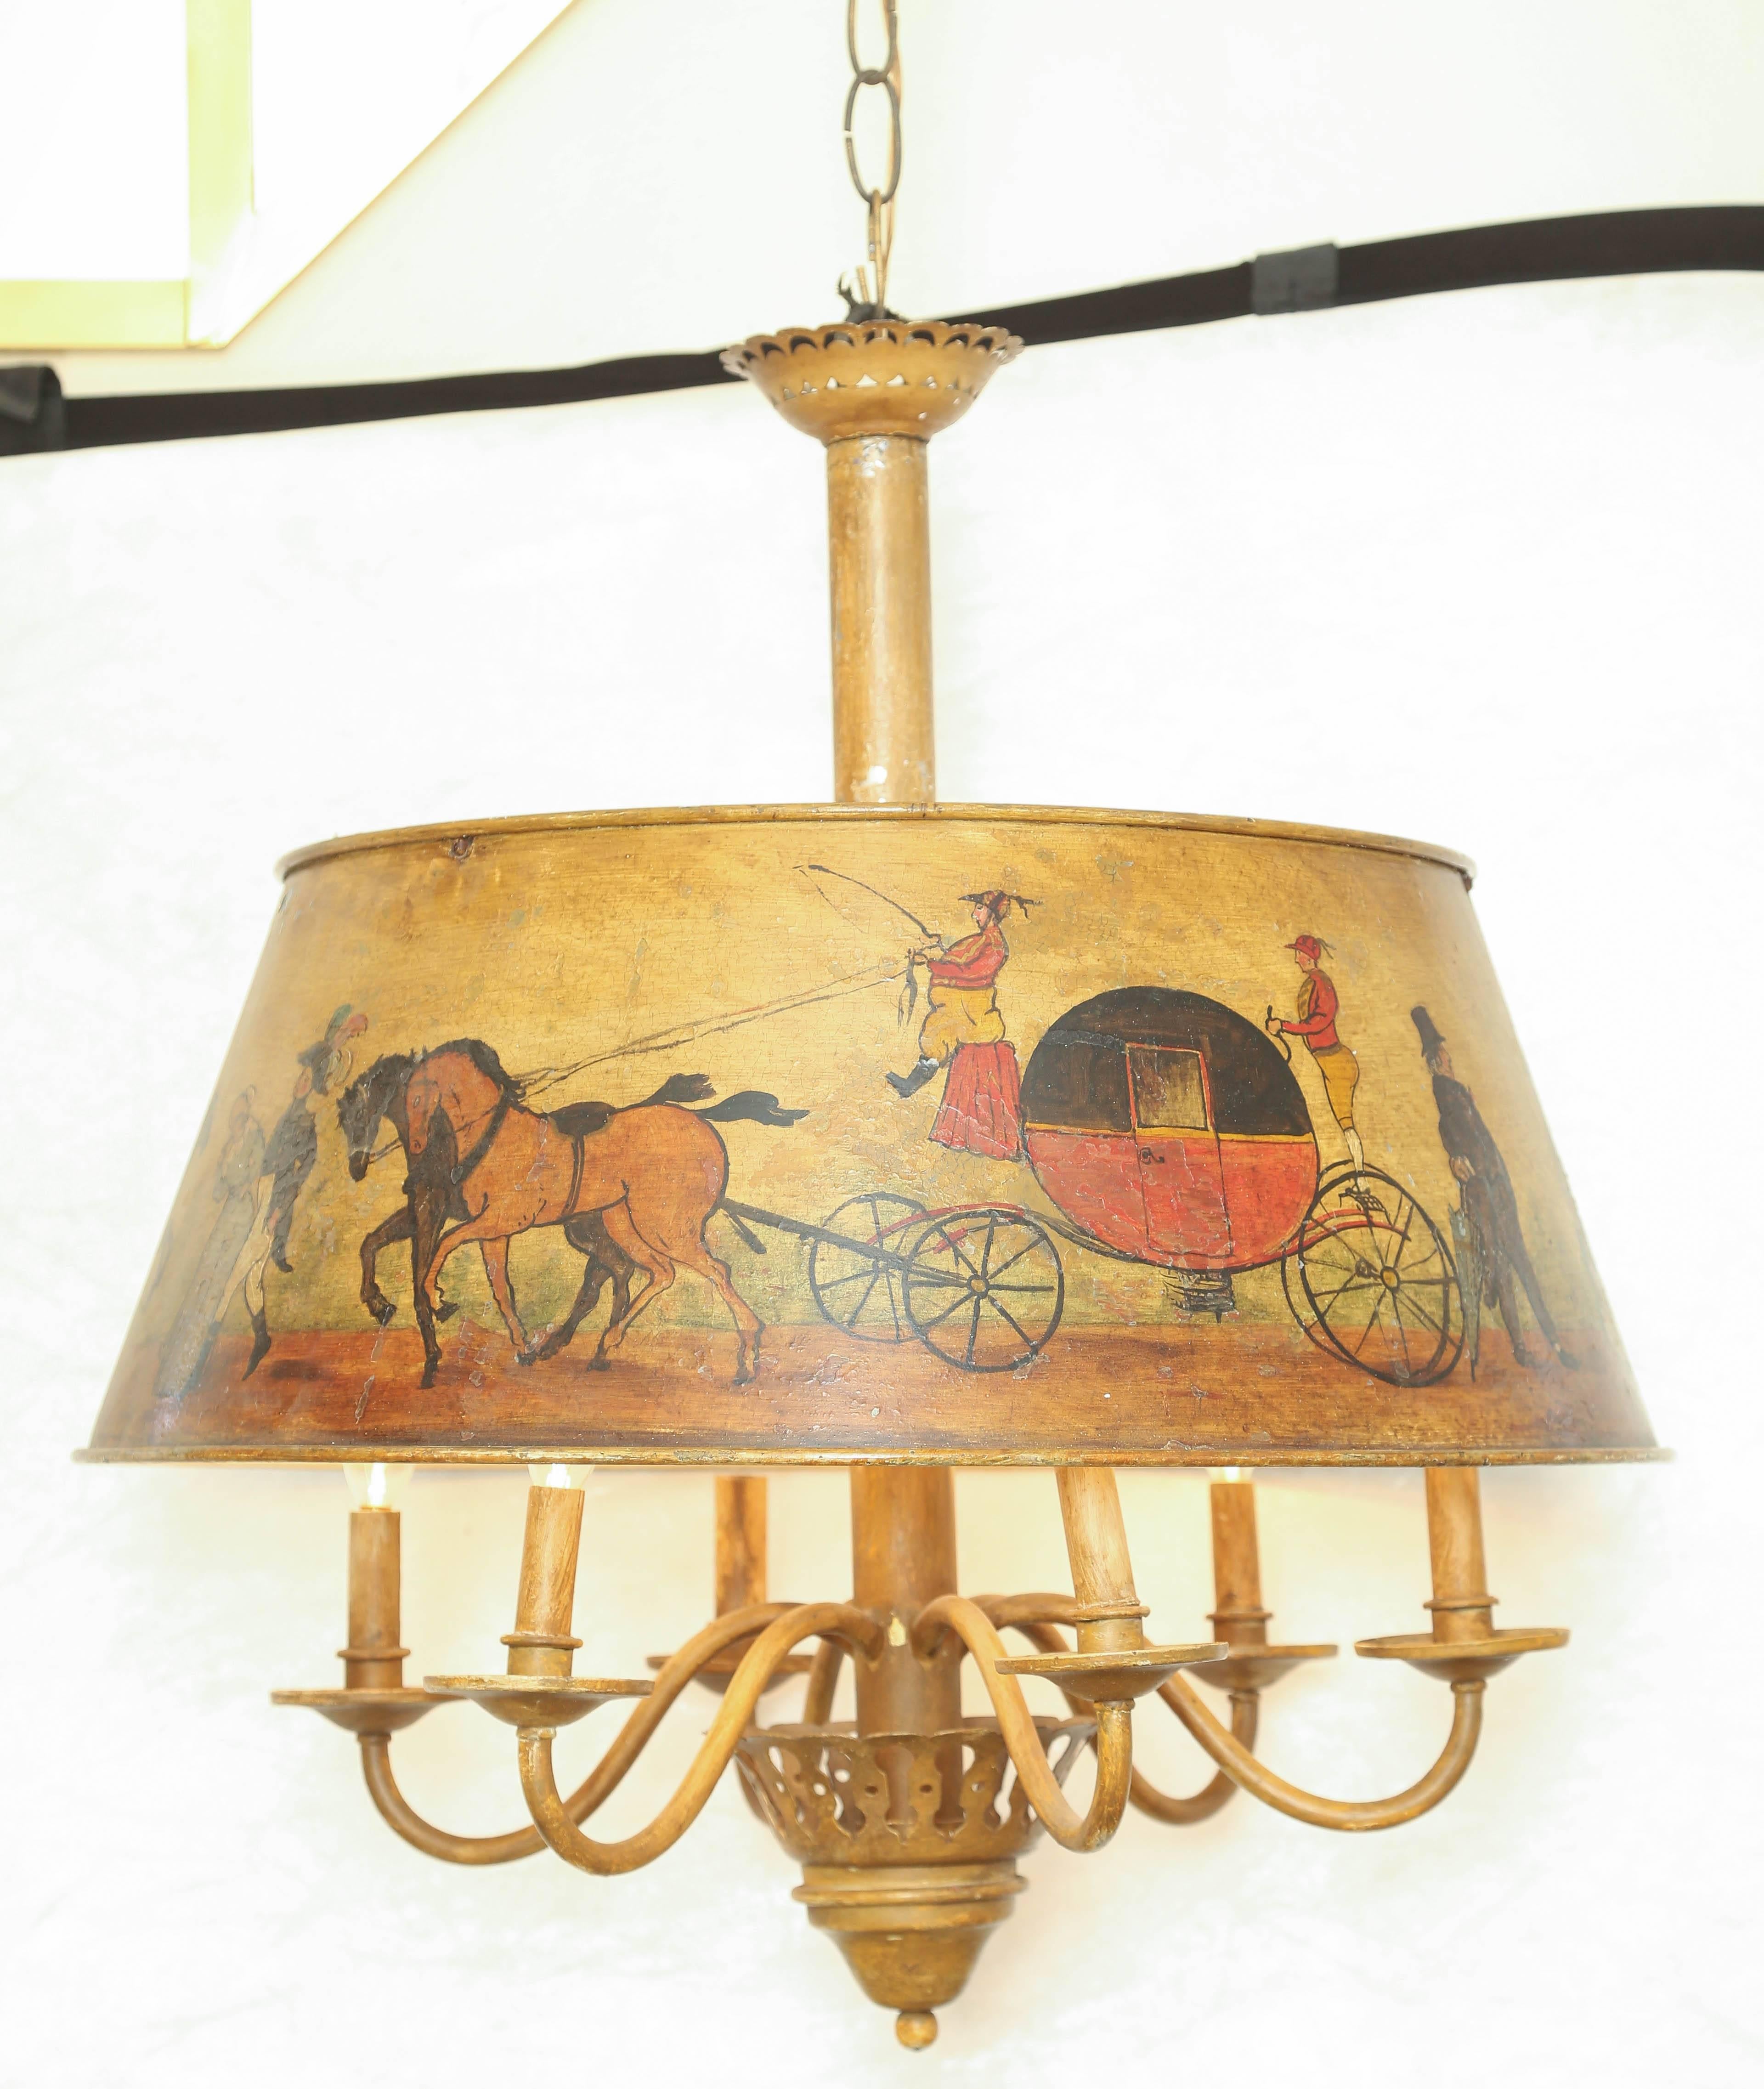 Late 19th Century Original Edwardian Six-Light Chandelier with Hand-Painted Vellum Lampshade